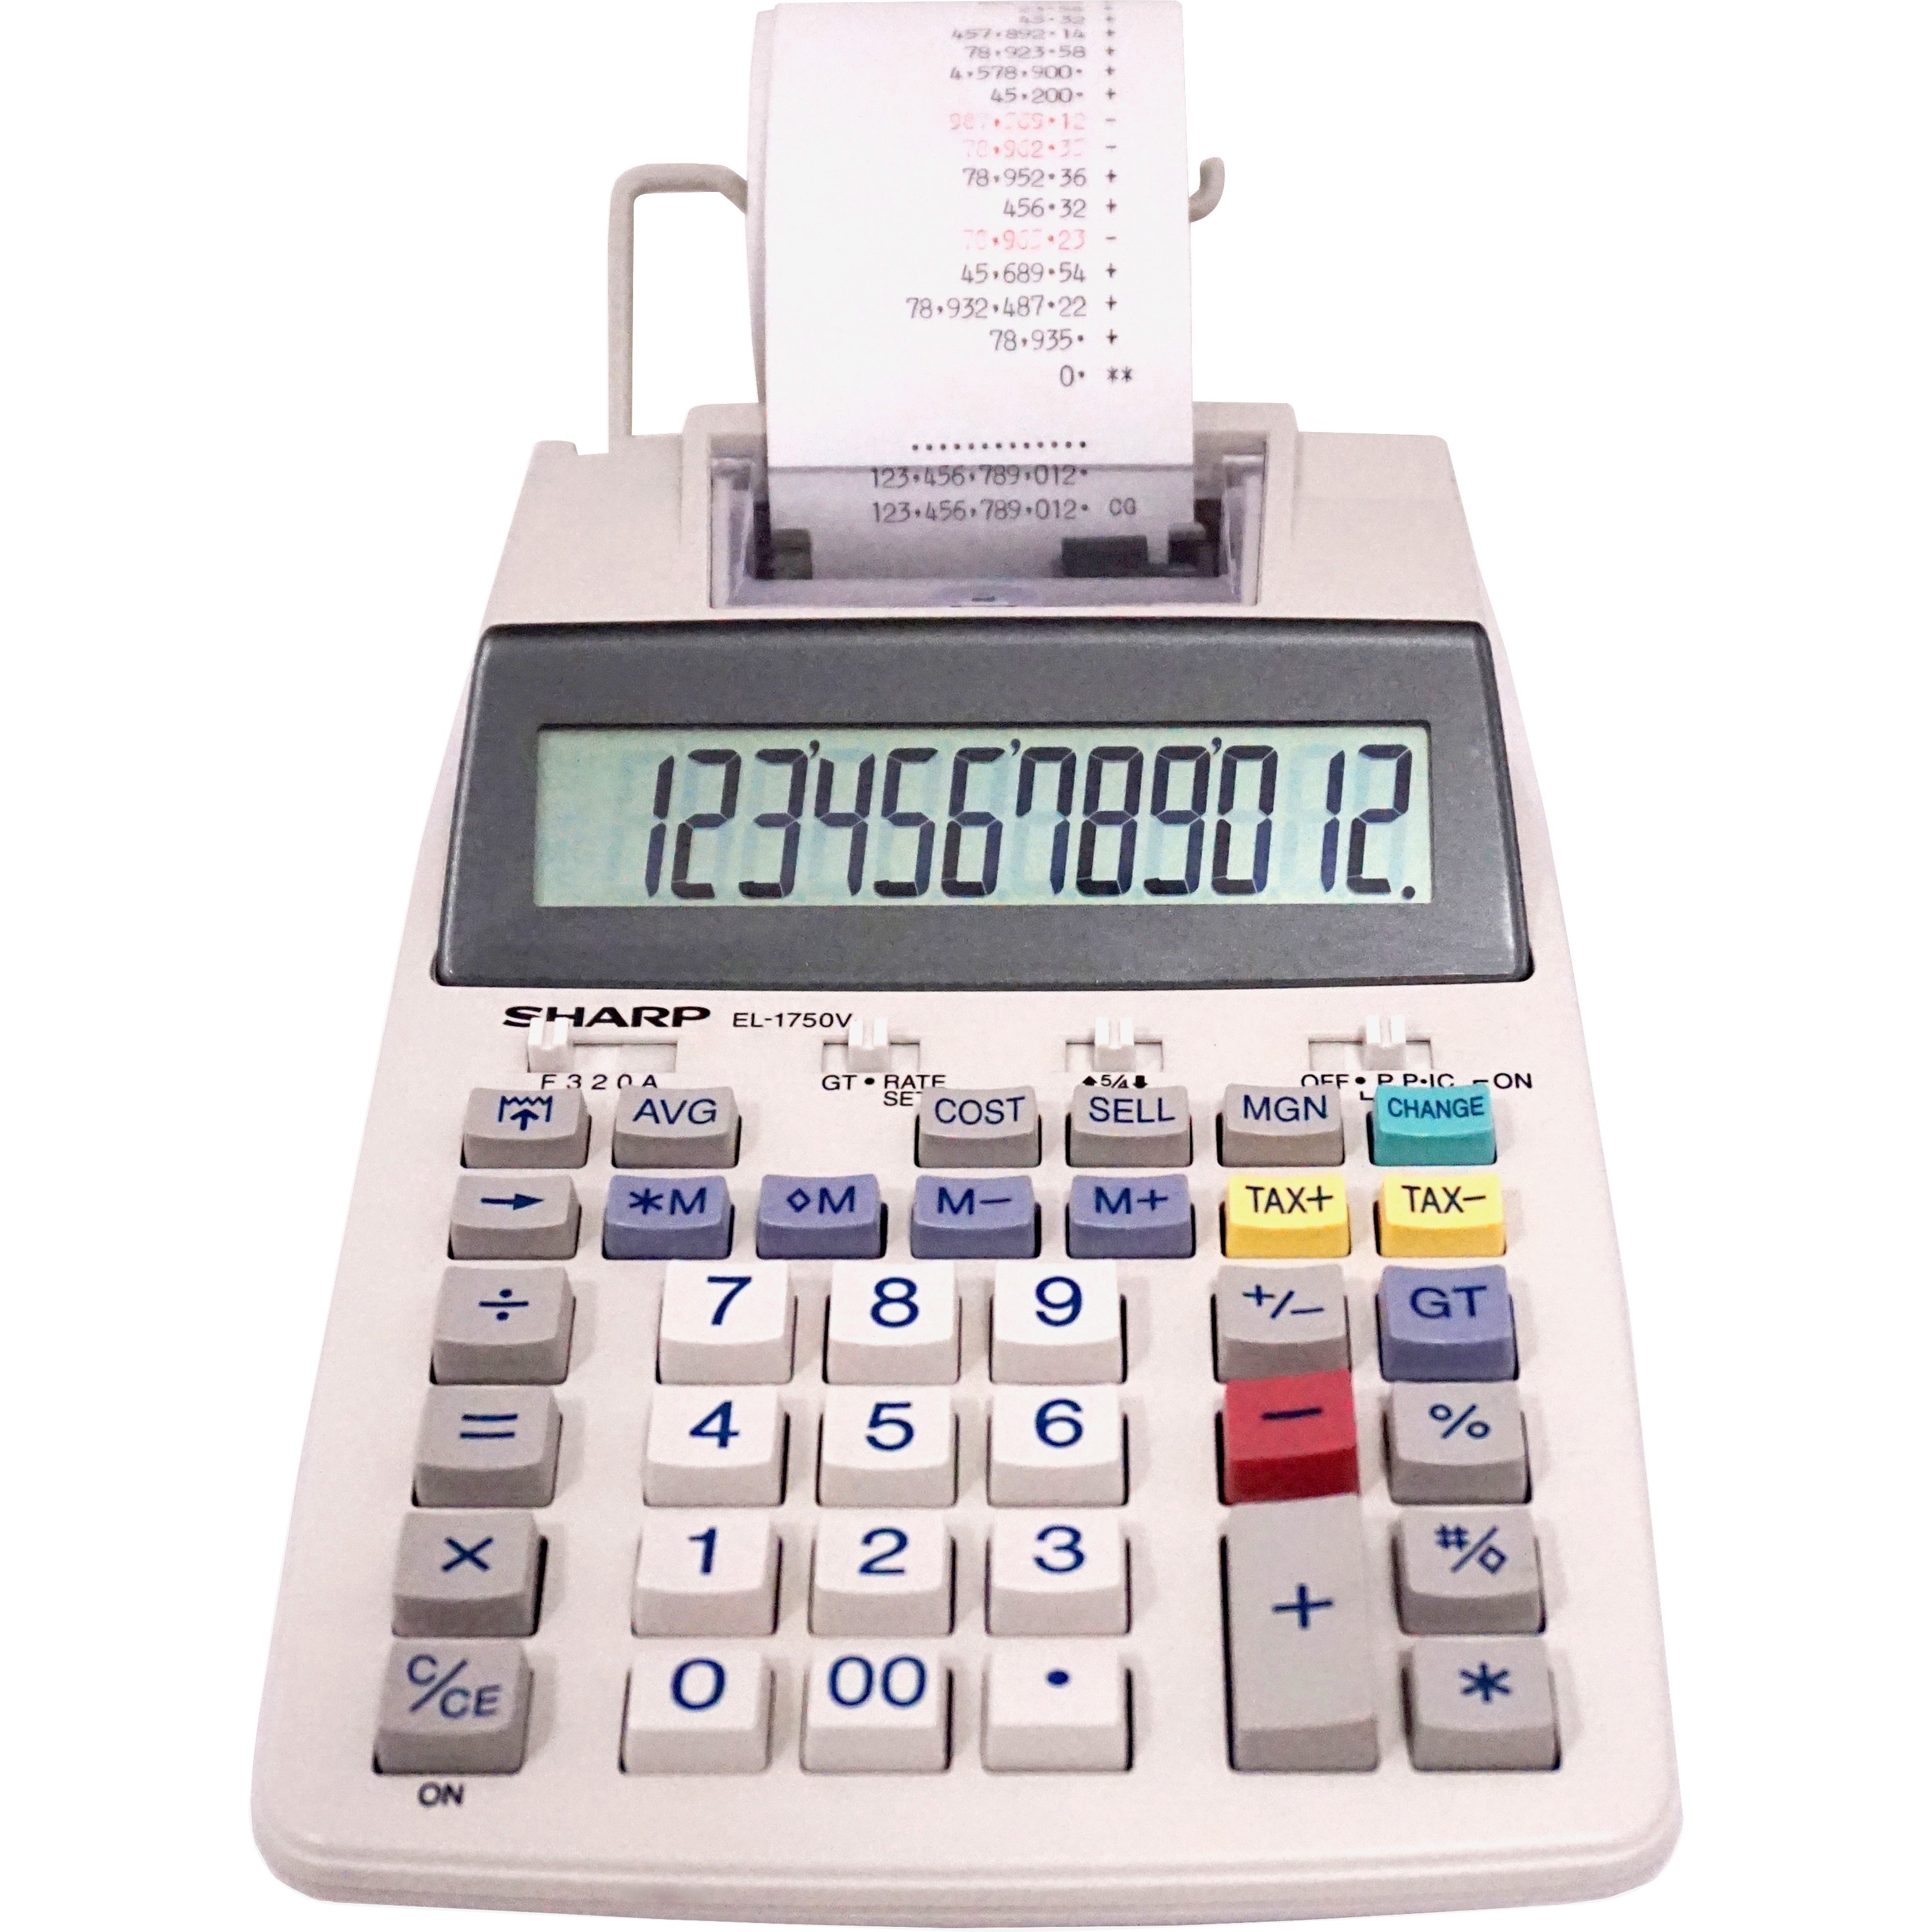 Sharp EL-1750V 12-Digit One-Touch Electric Commercial Printing Calculator White